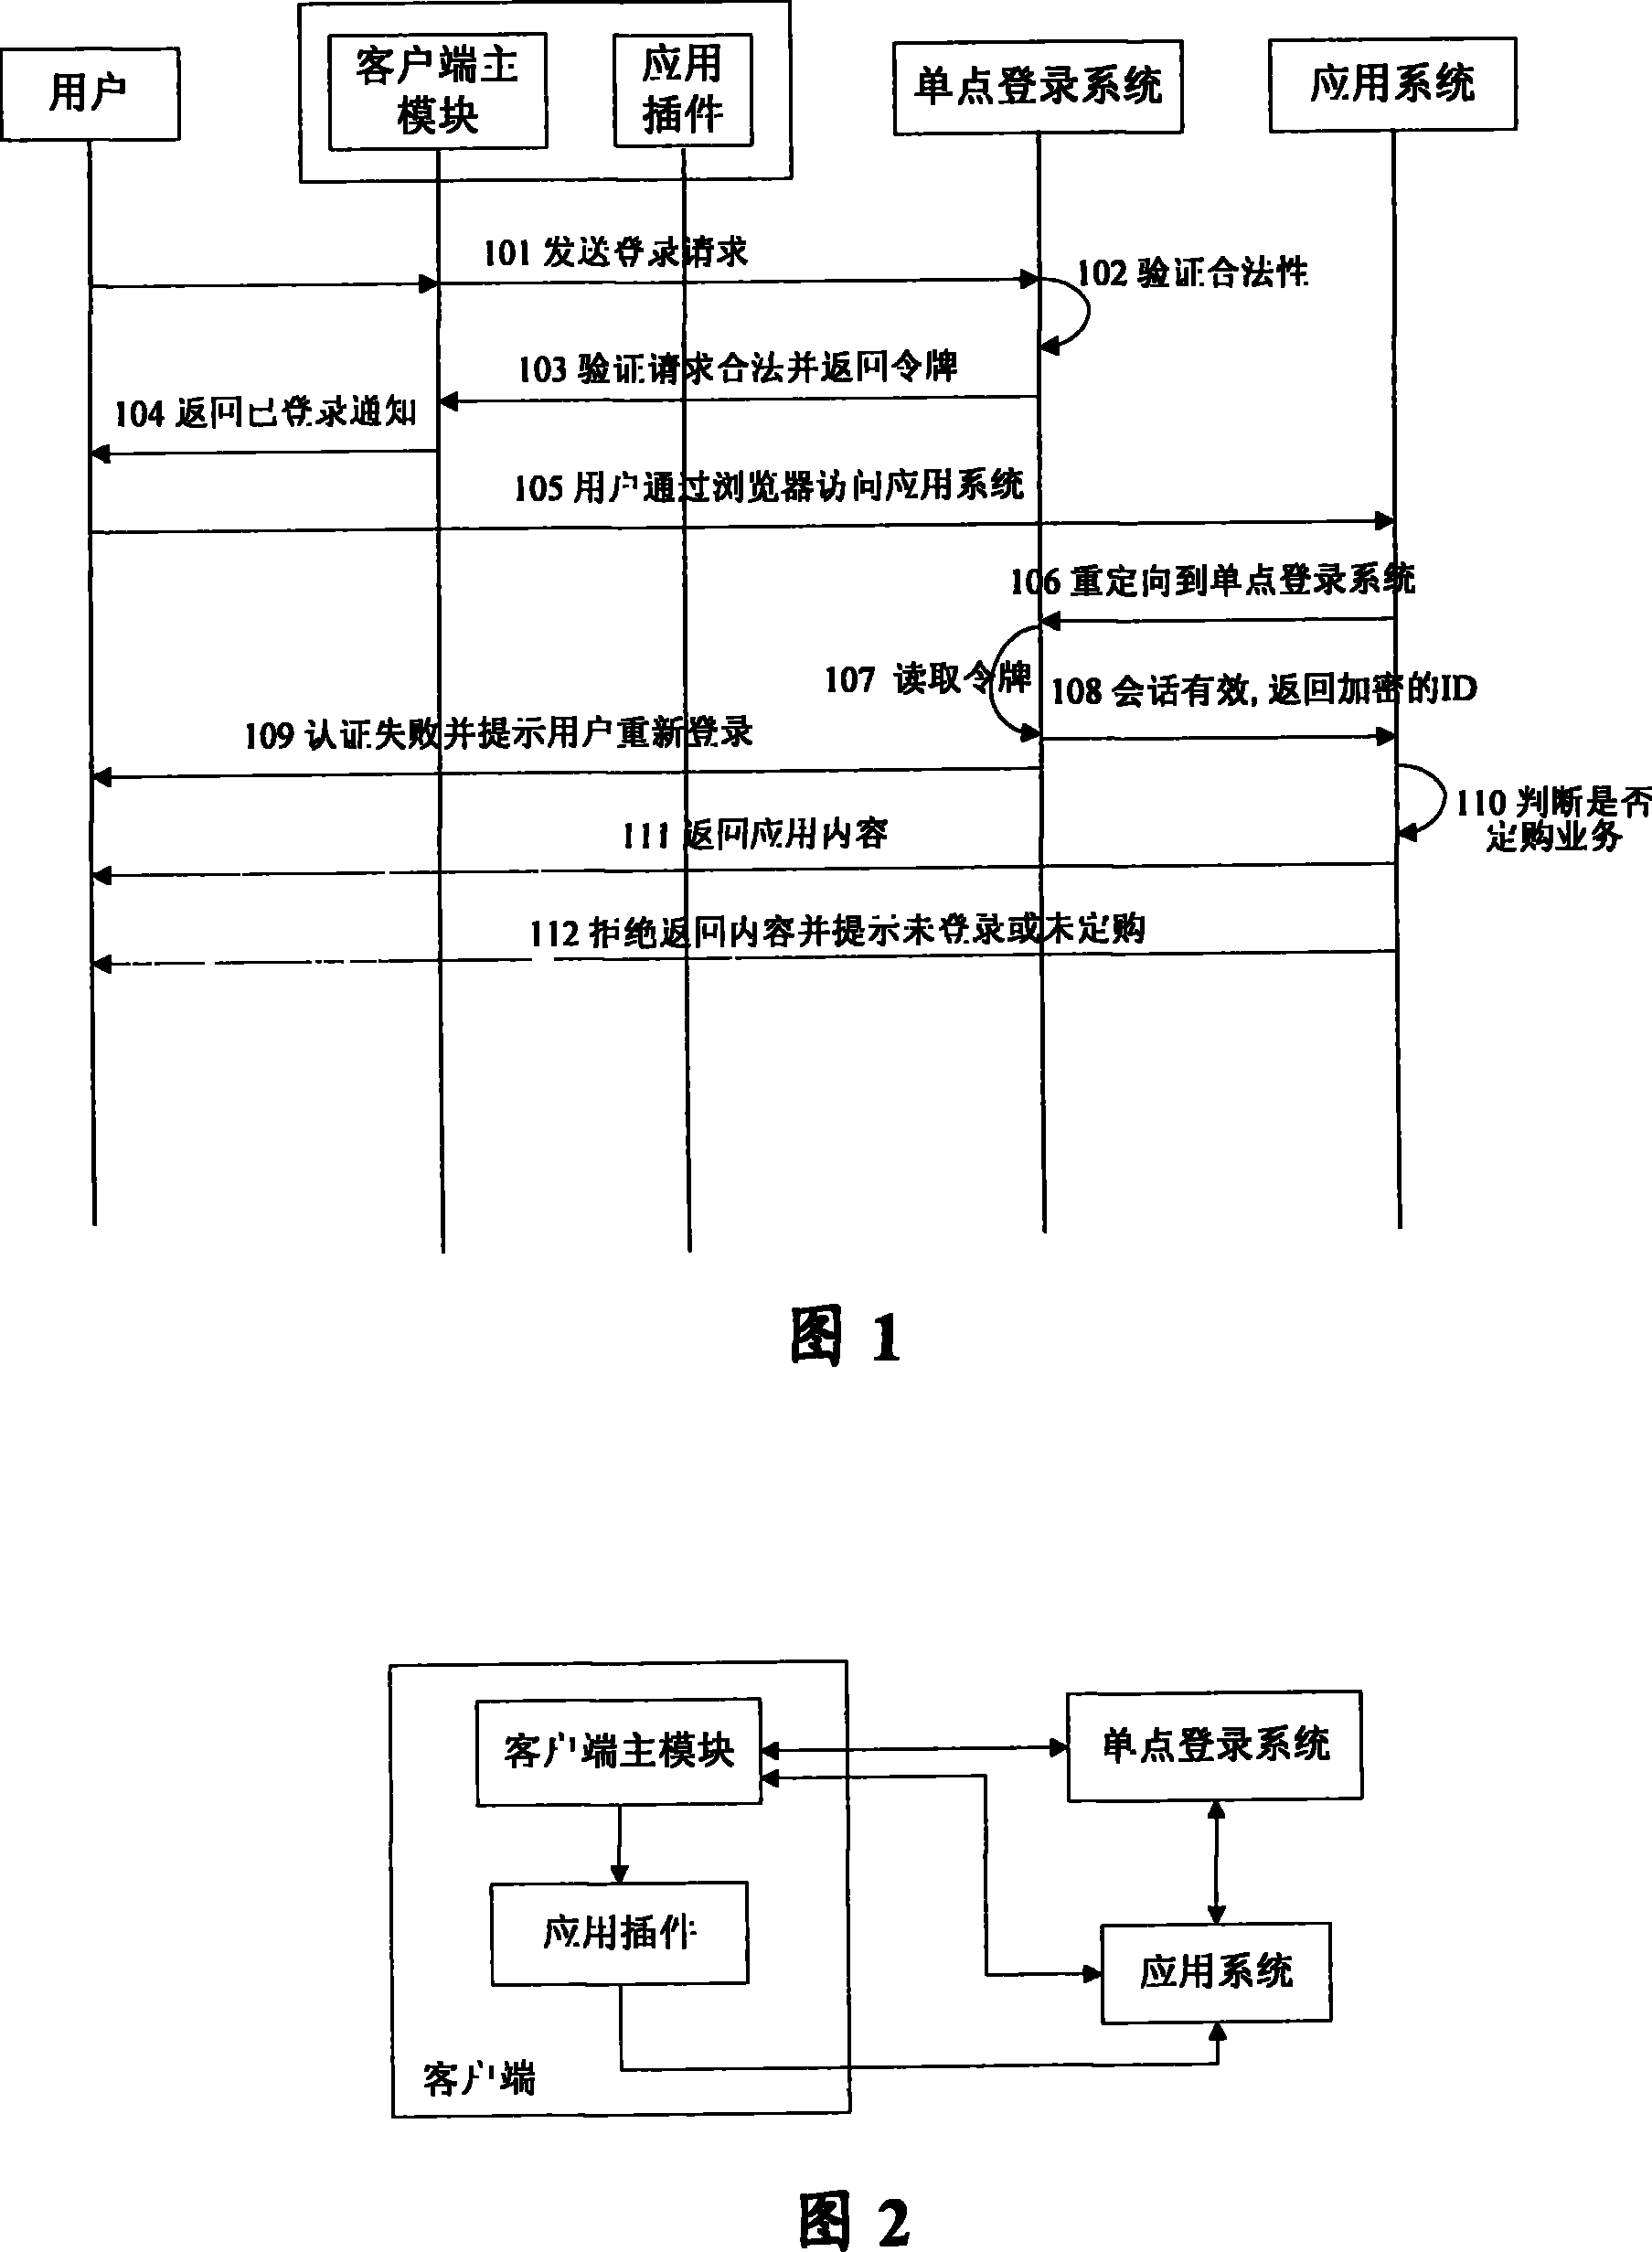 Method and device for accessing plug-in connector applied system by client terminal